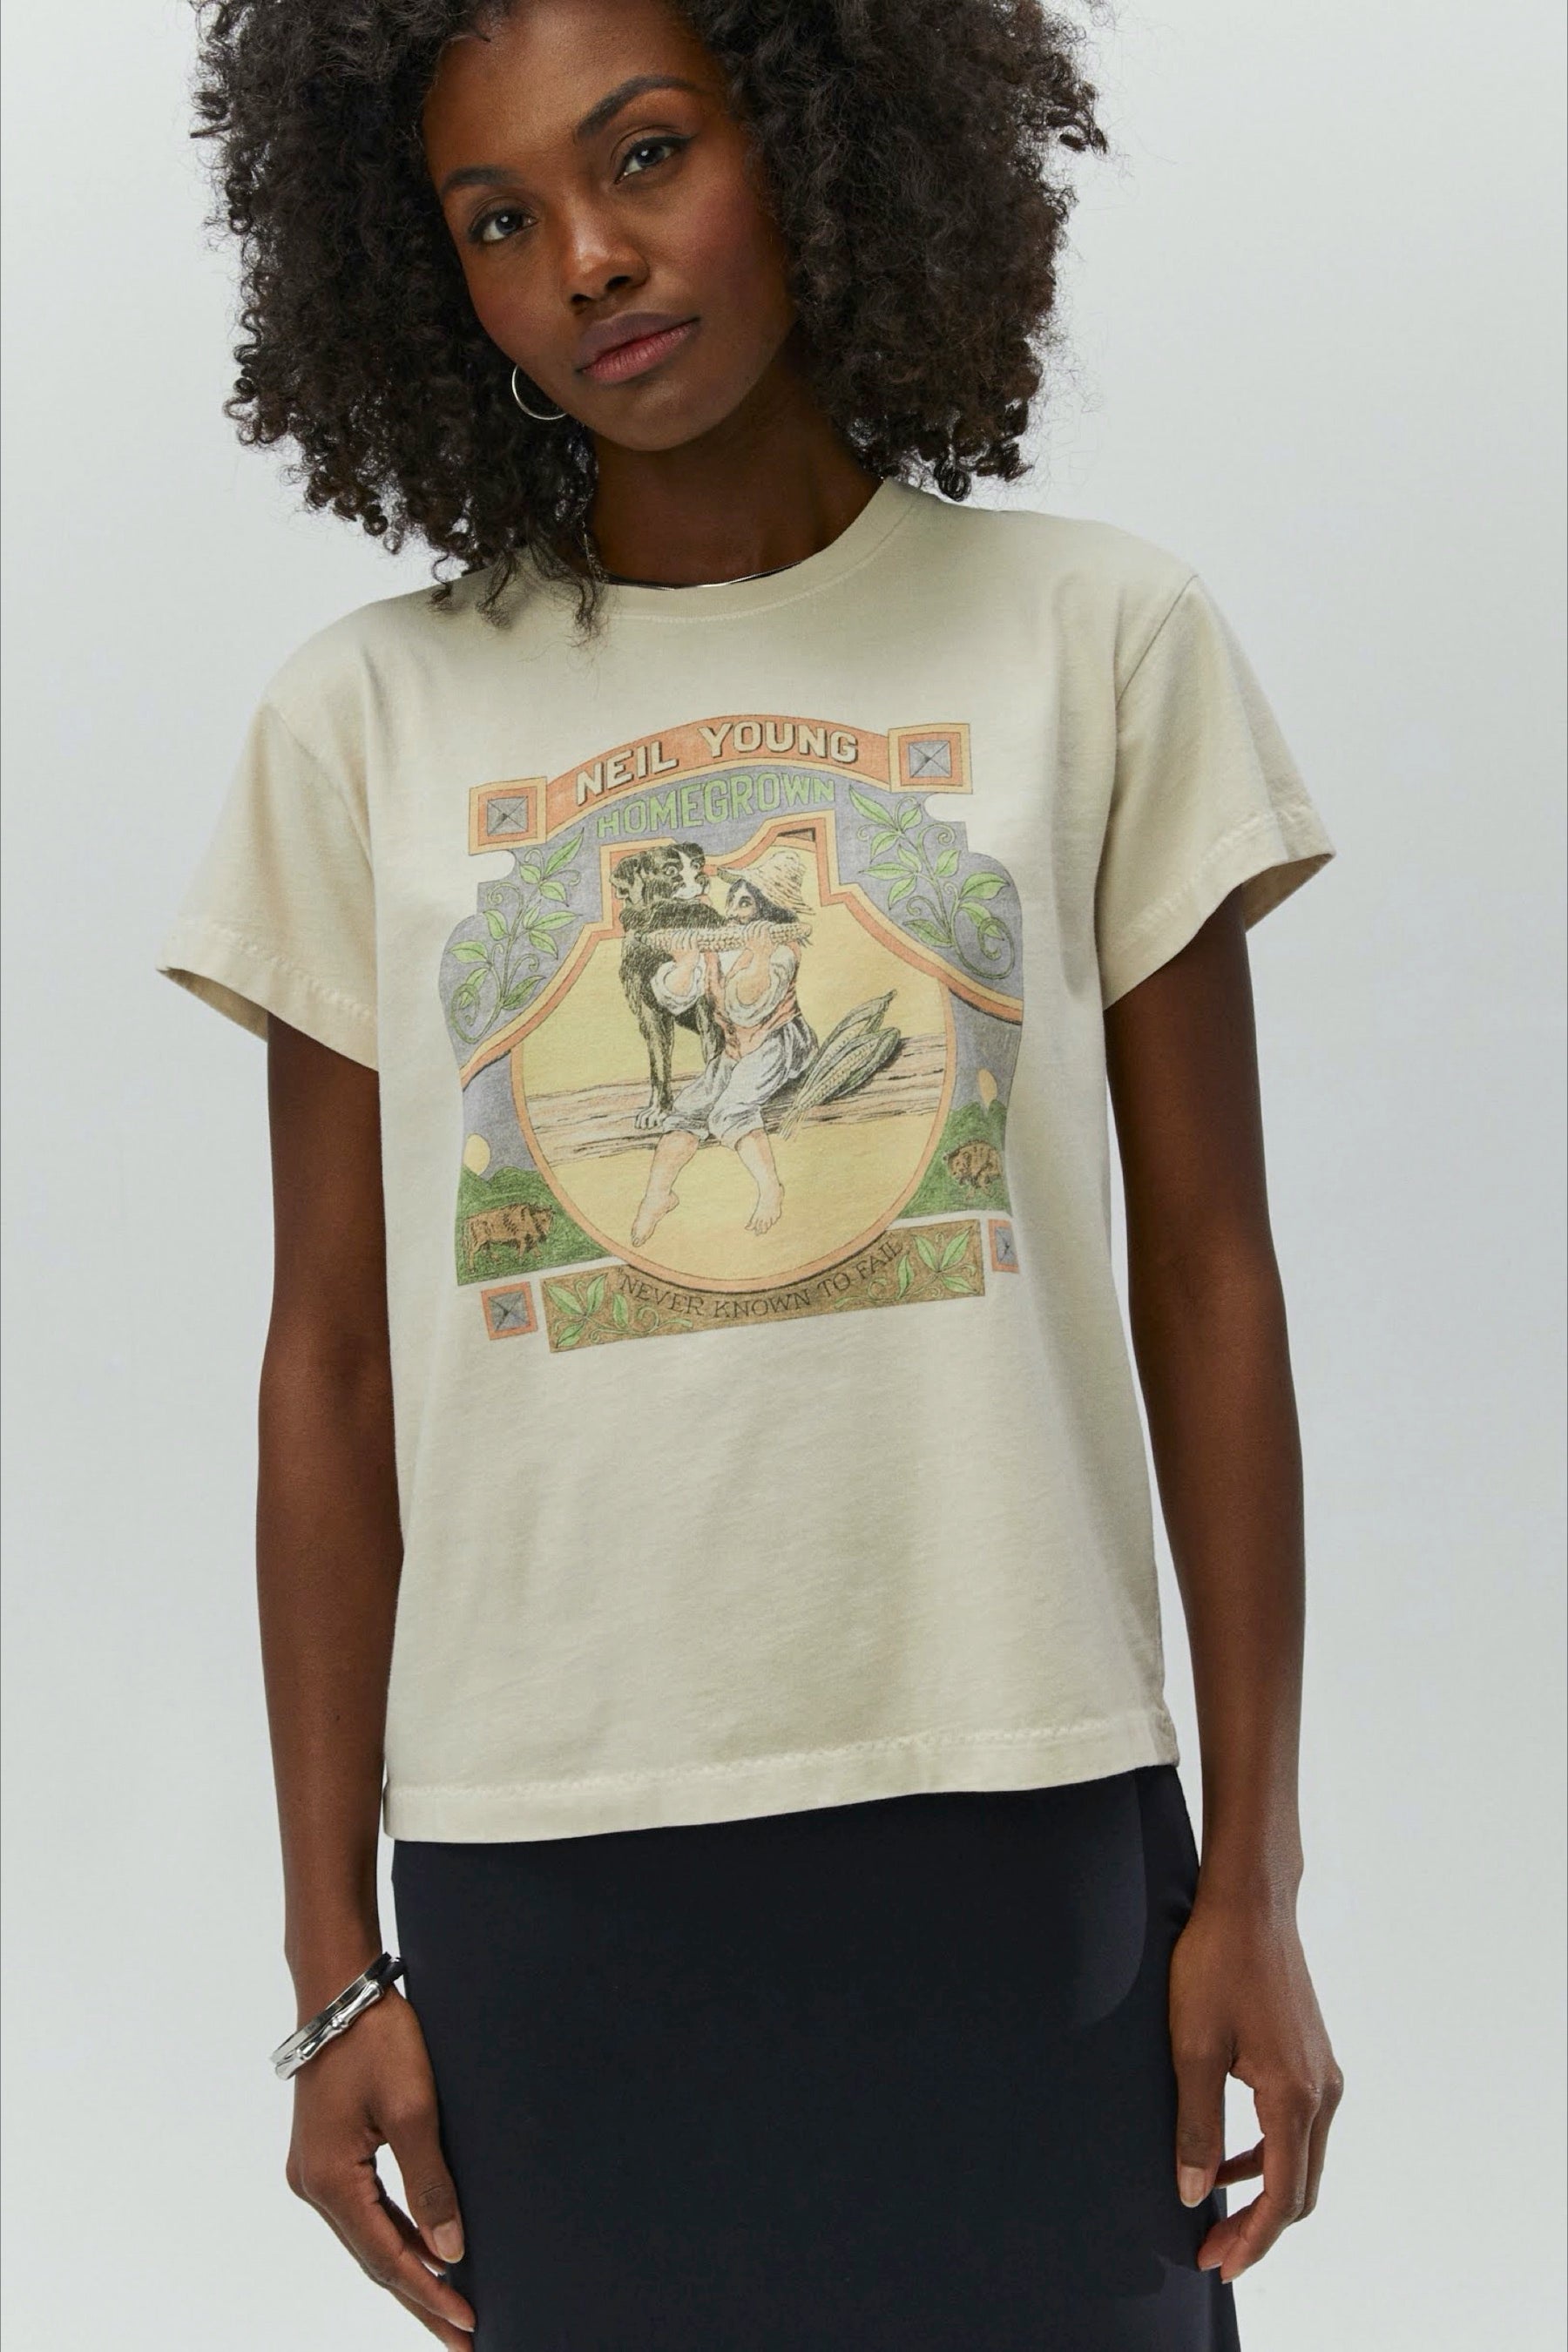 Neil Young Home Grown Tour Tee